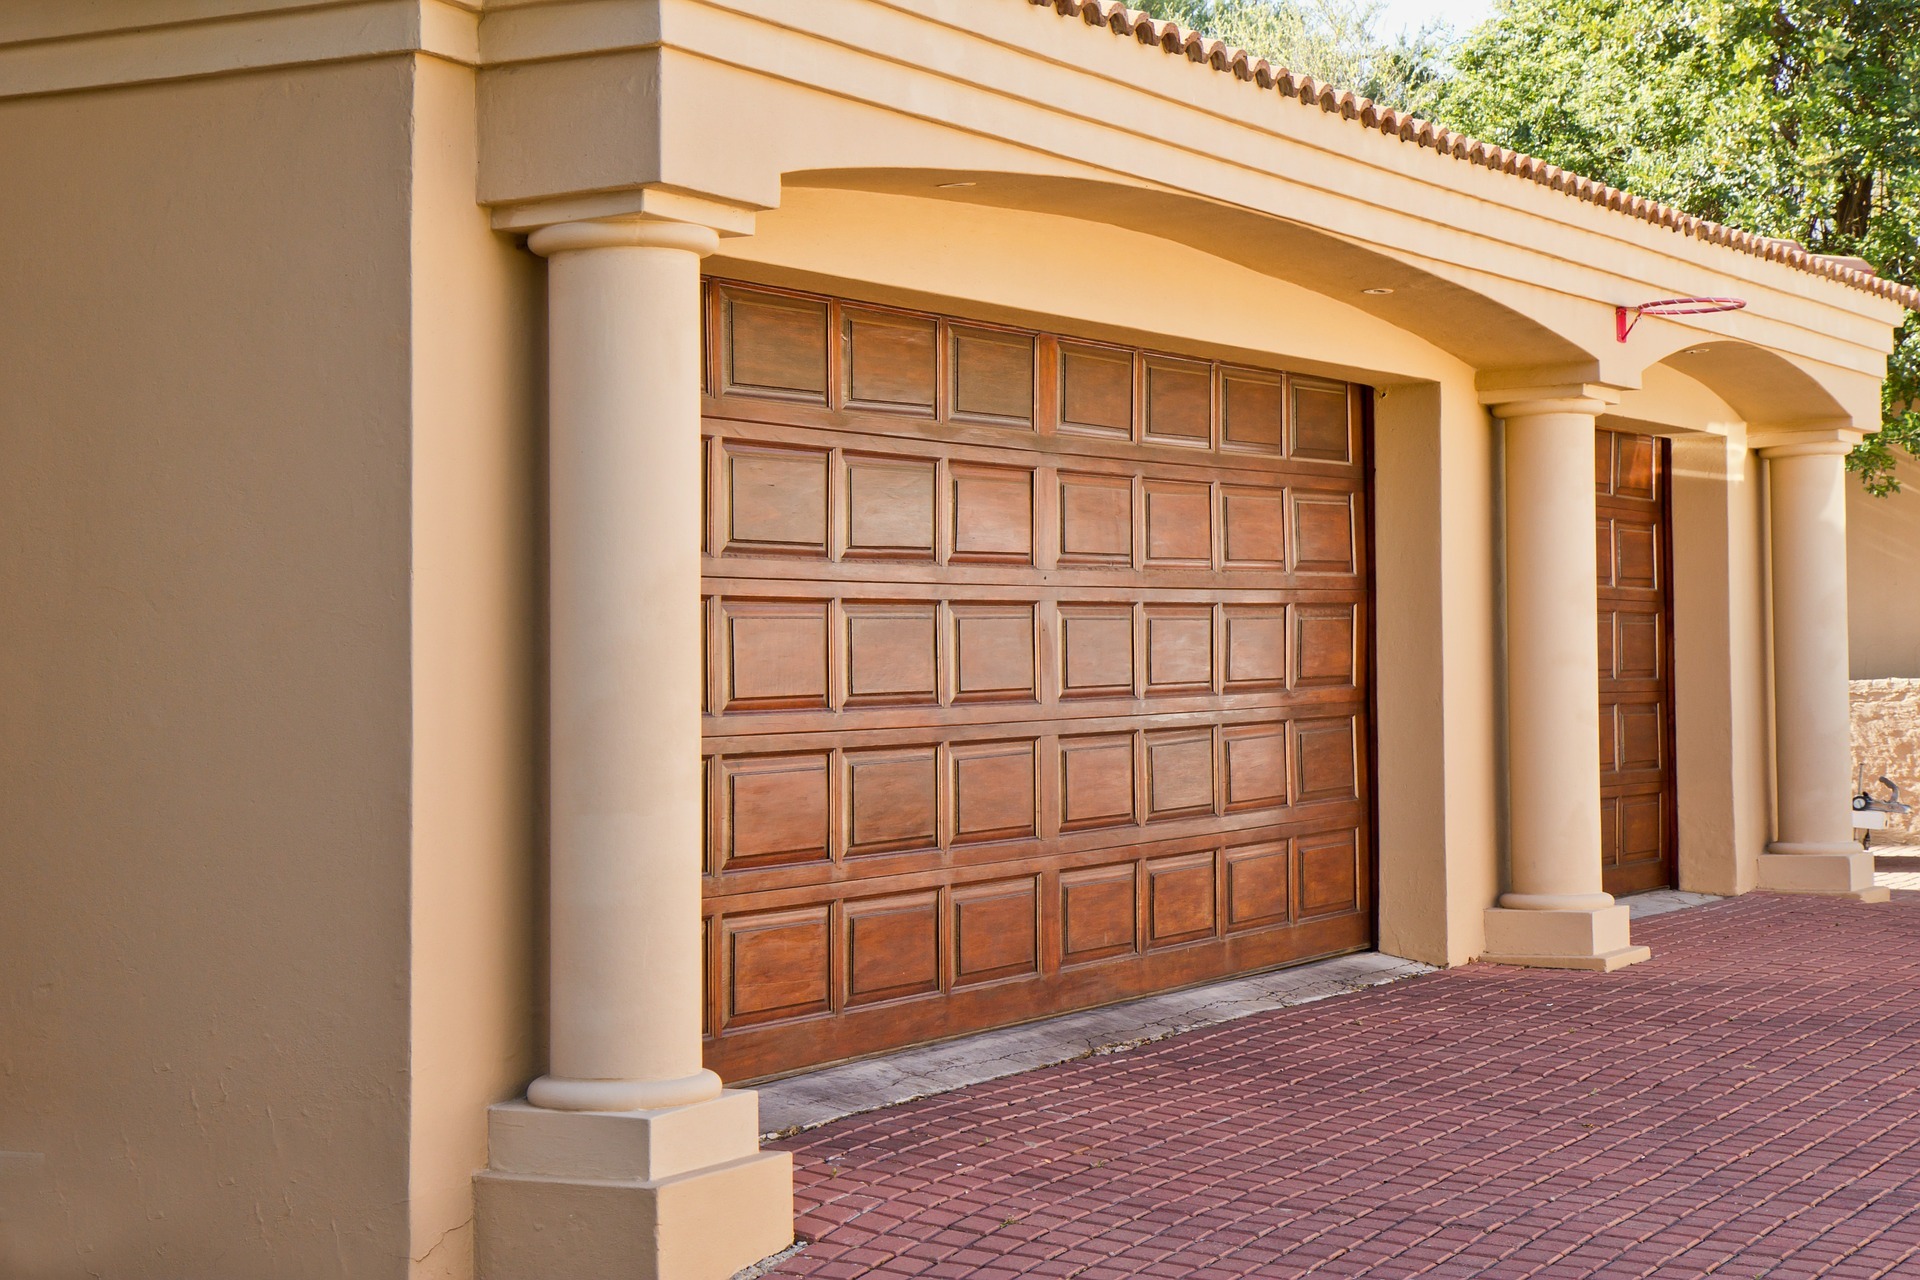 4 Reasons Why Detached Garages Are Gaining Popularity